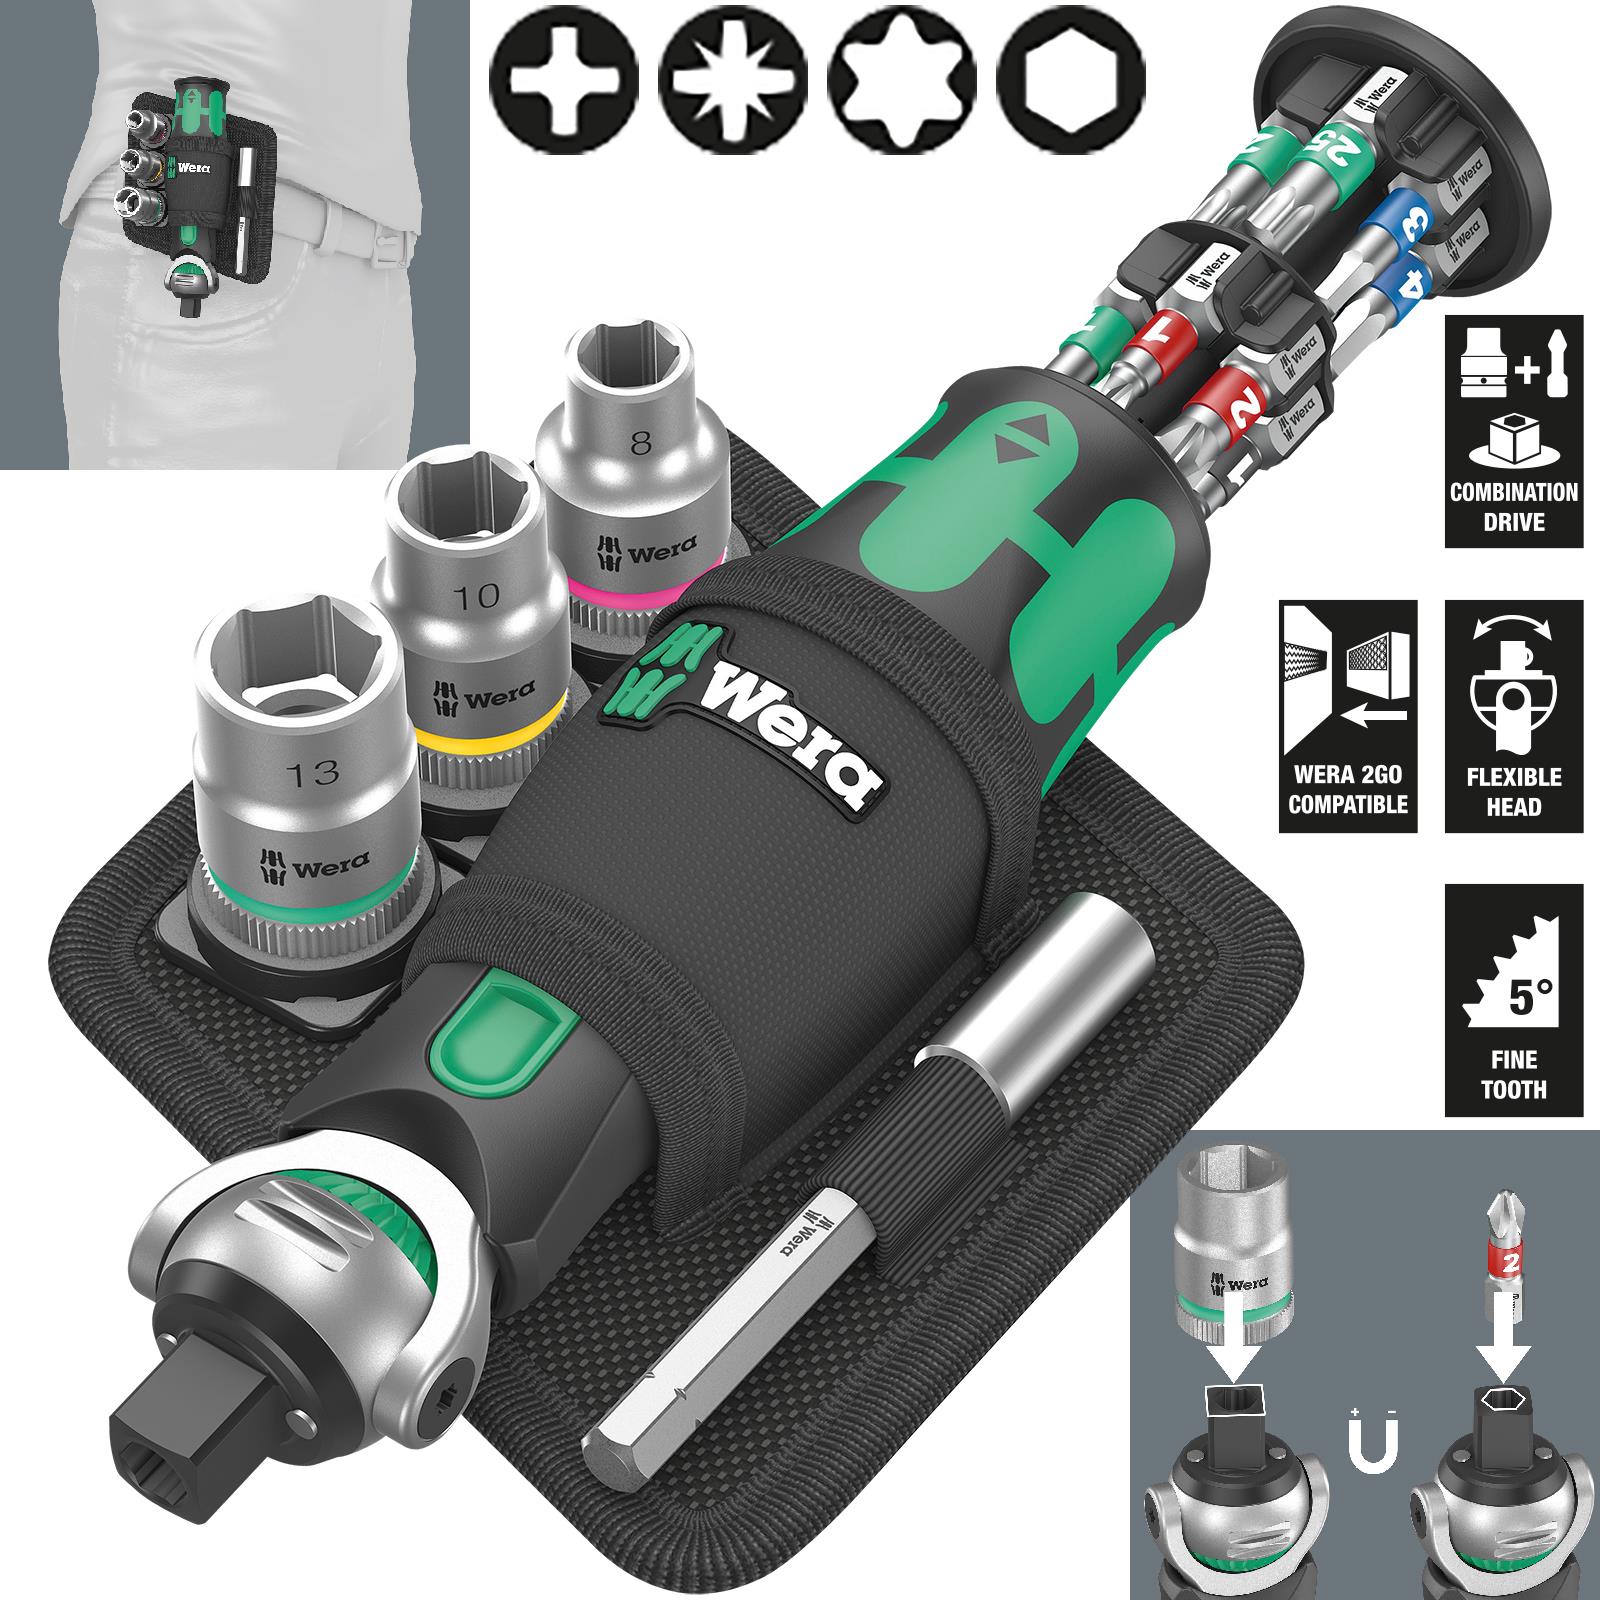 Wera Compact Screwdriver Socket Wrench Zyklop Pocket Set 2 18 Pieces 8009 3/8" Drive 1/4" Hex